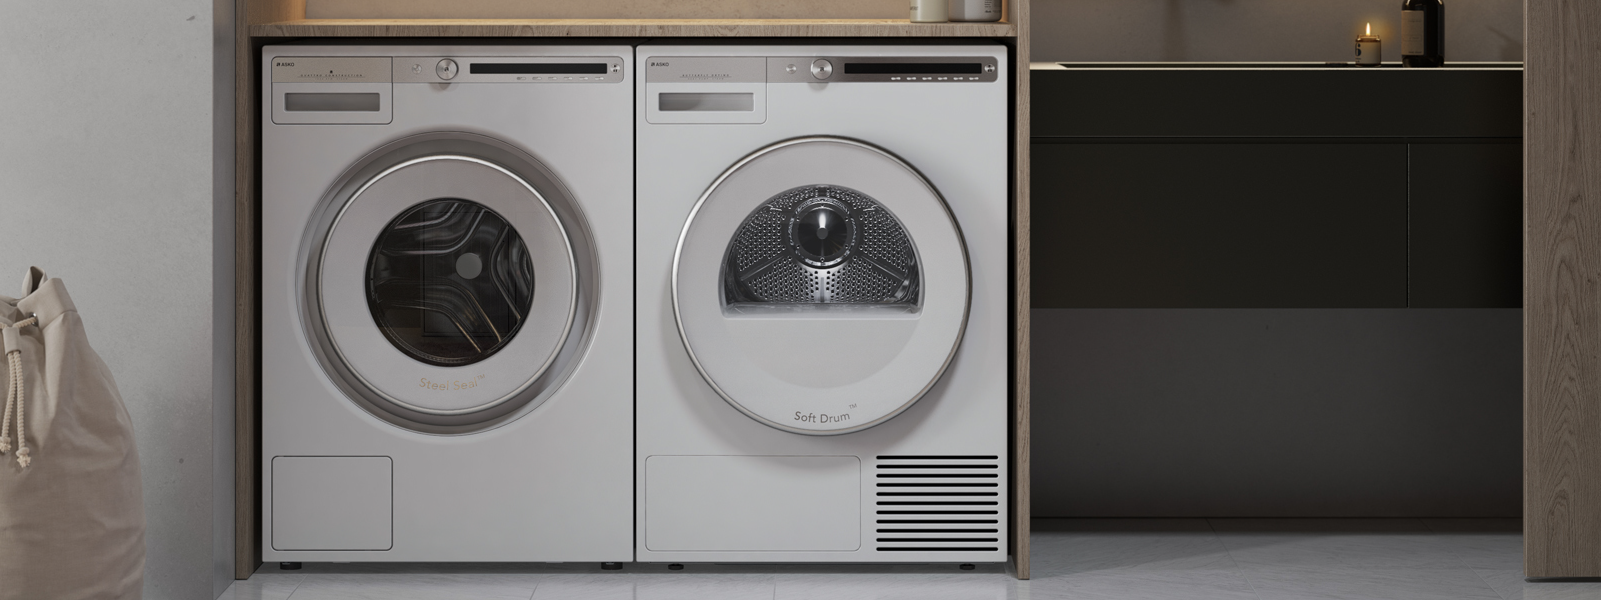 Save $300 on selected Asko Laundry Appliances at Hart & Co